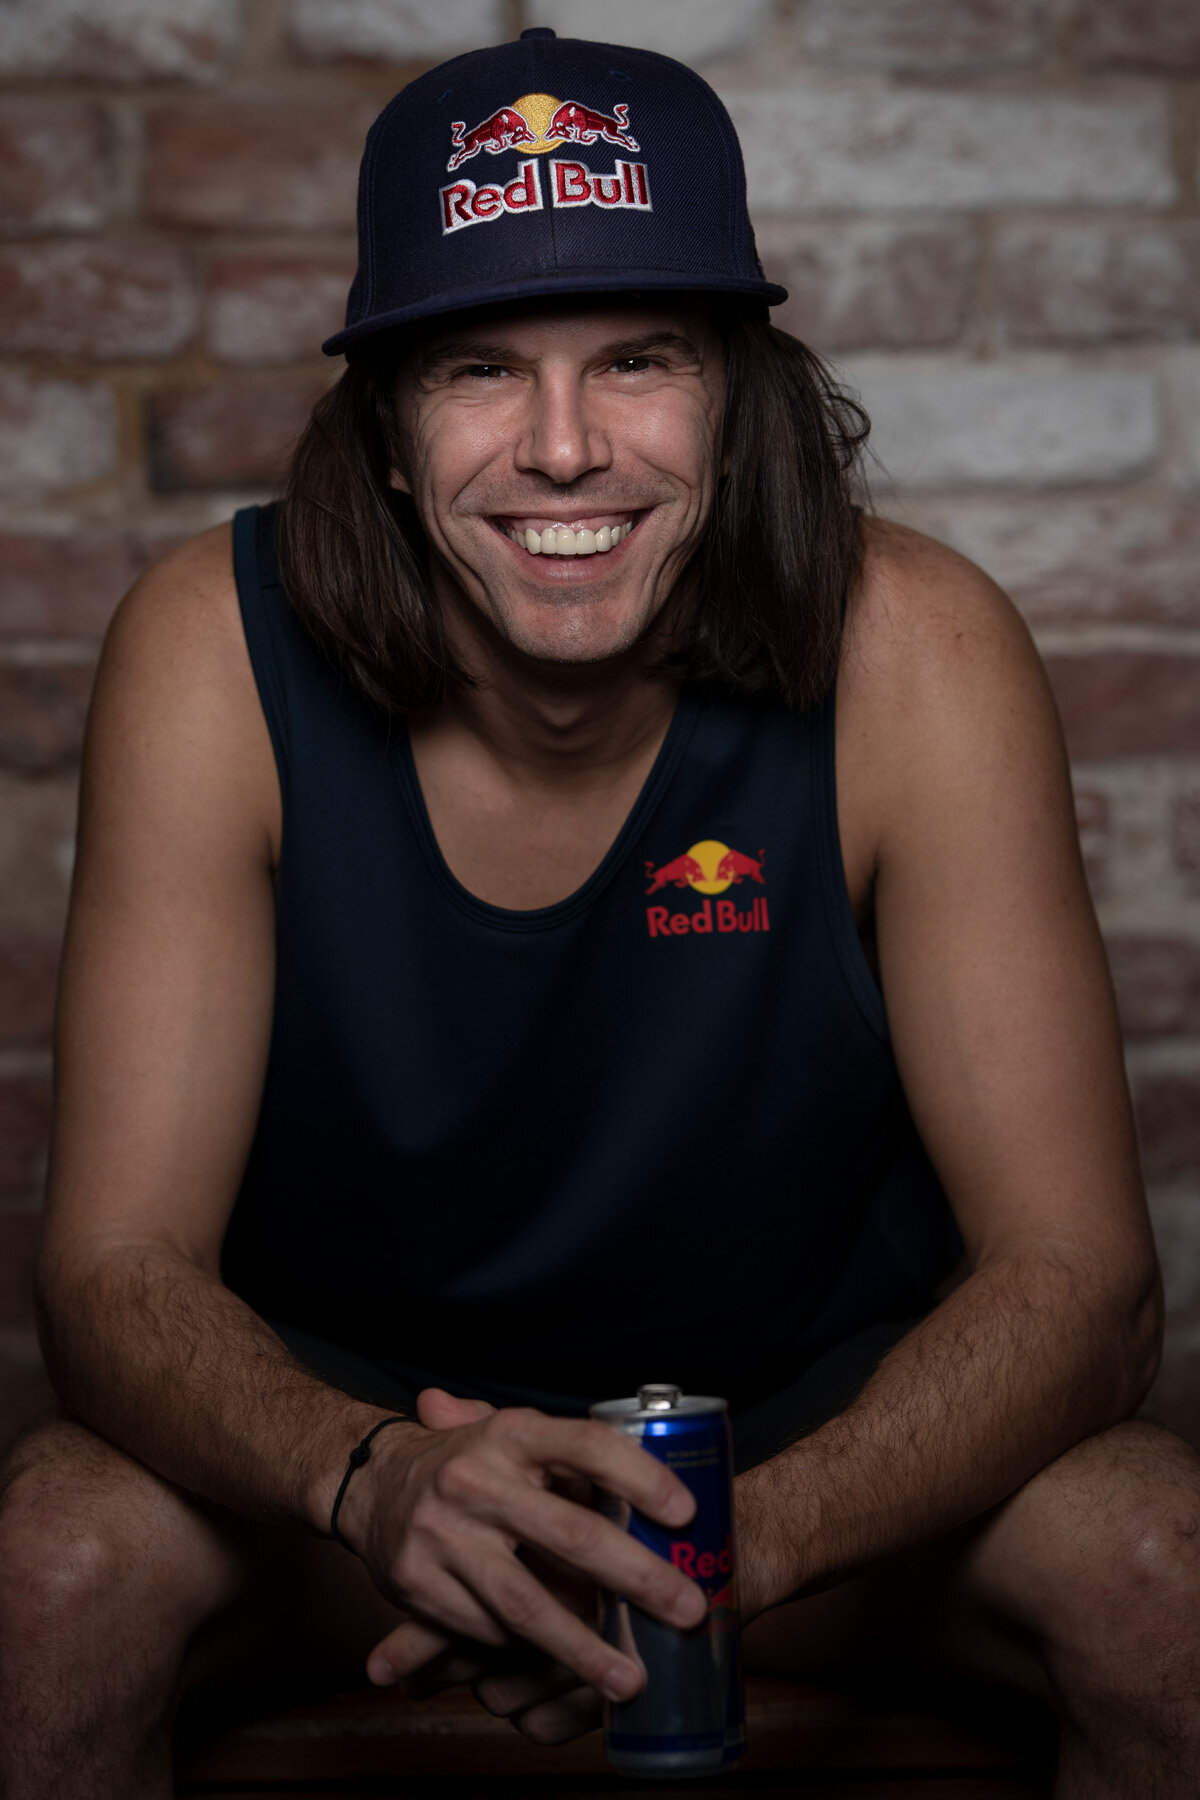  Daniel Dhers poses for a portrait during his visit to the Red Bull Athlete Performance Center in Salzburg on Febreruary 14, 2020 